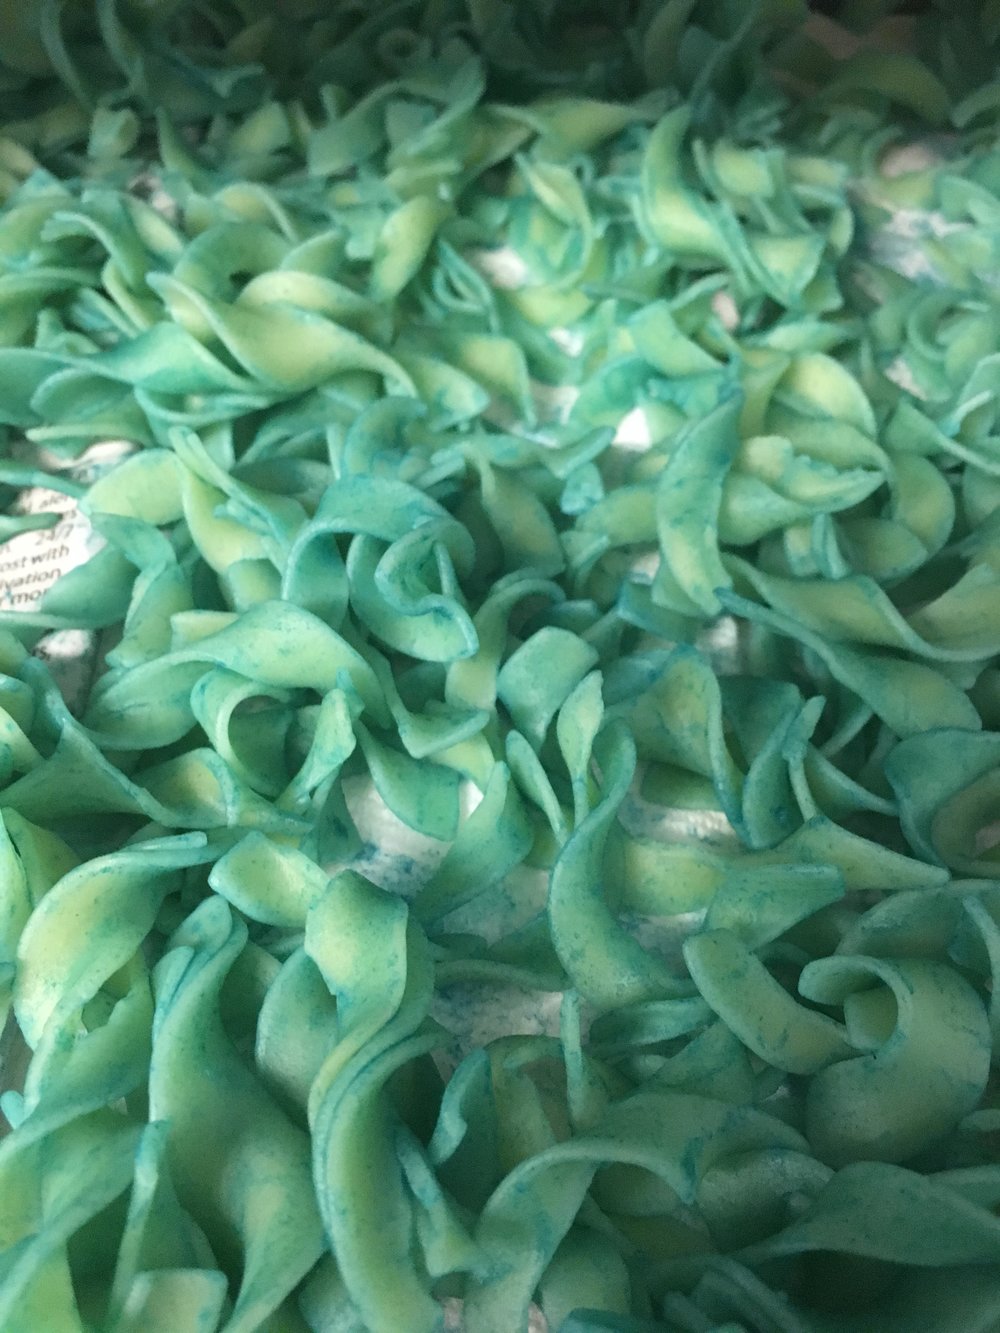 Dyed cooked egg noodles